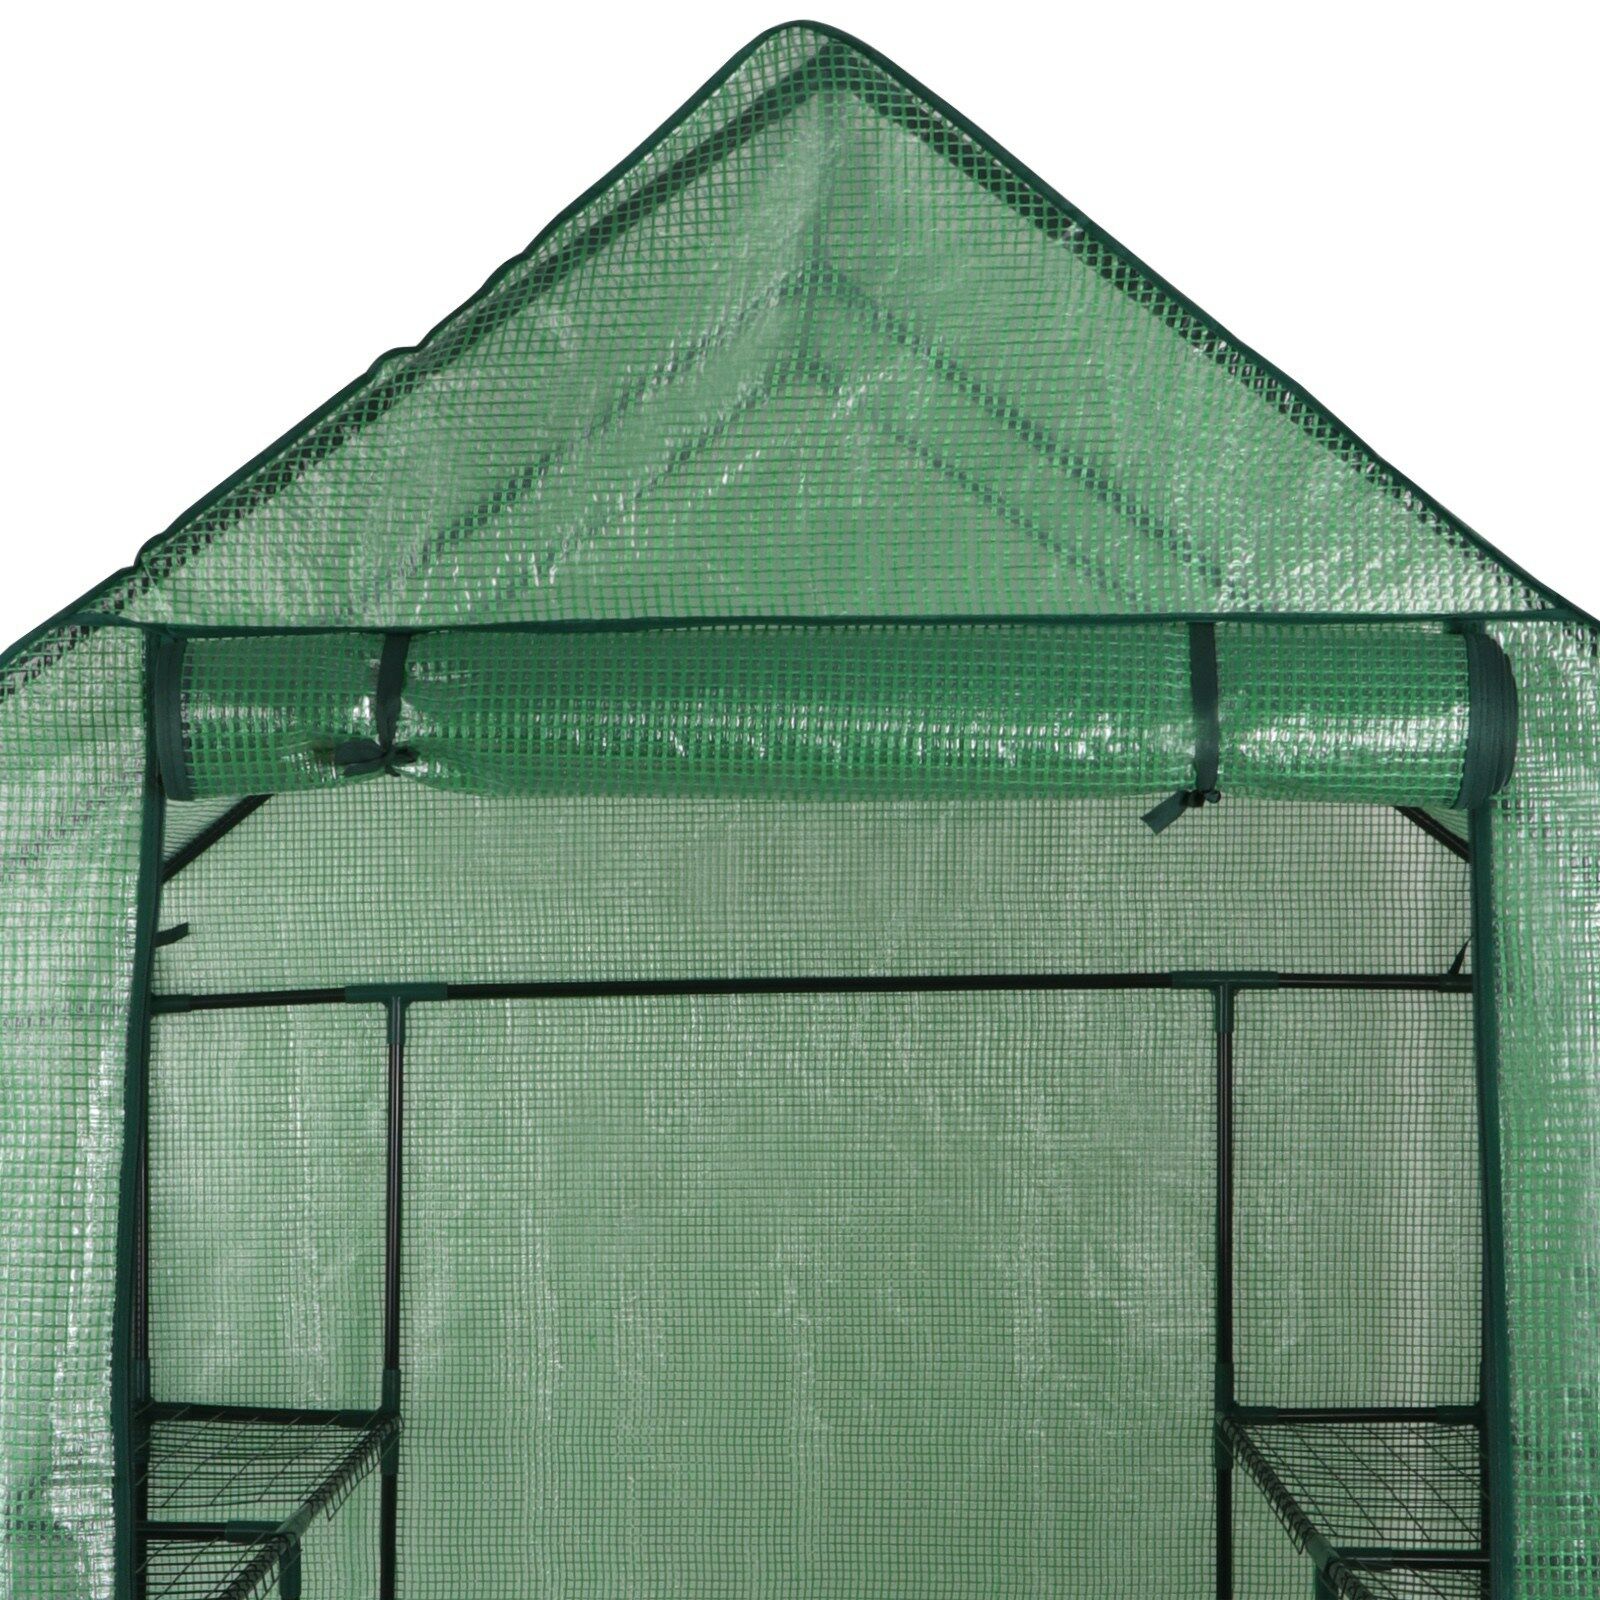 Greenhouse - Large Walk In Portable Indoor Outdoor Greenhouse